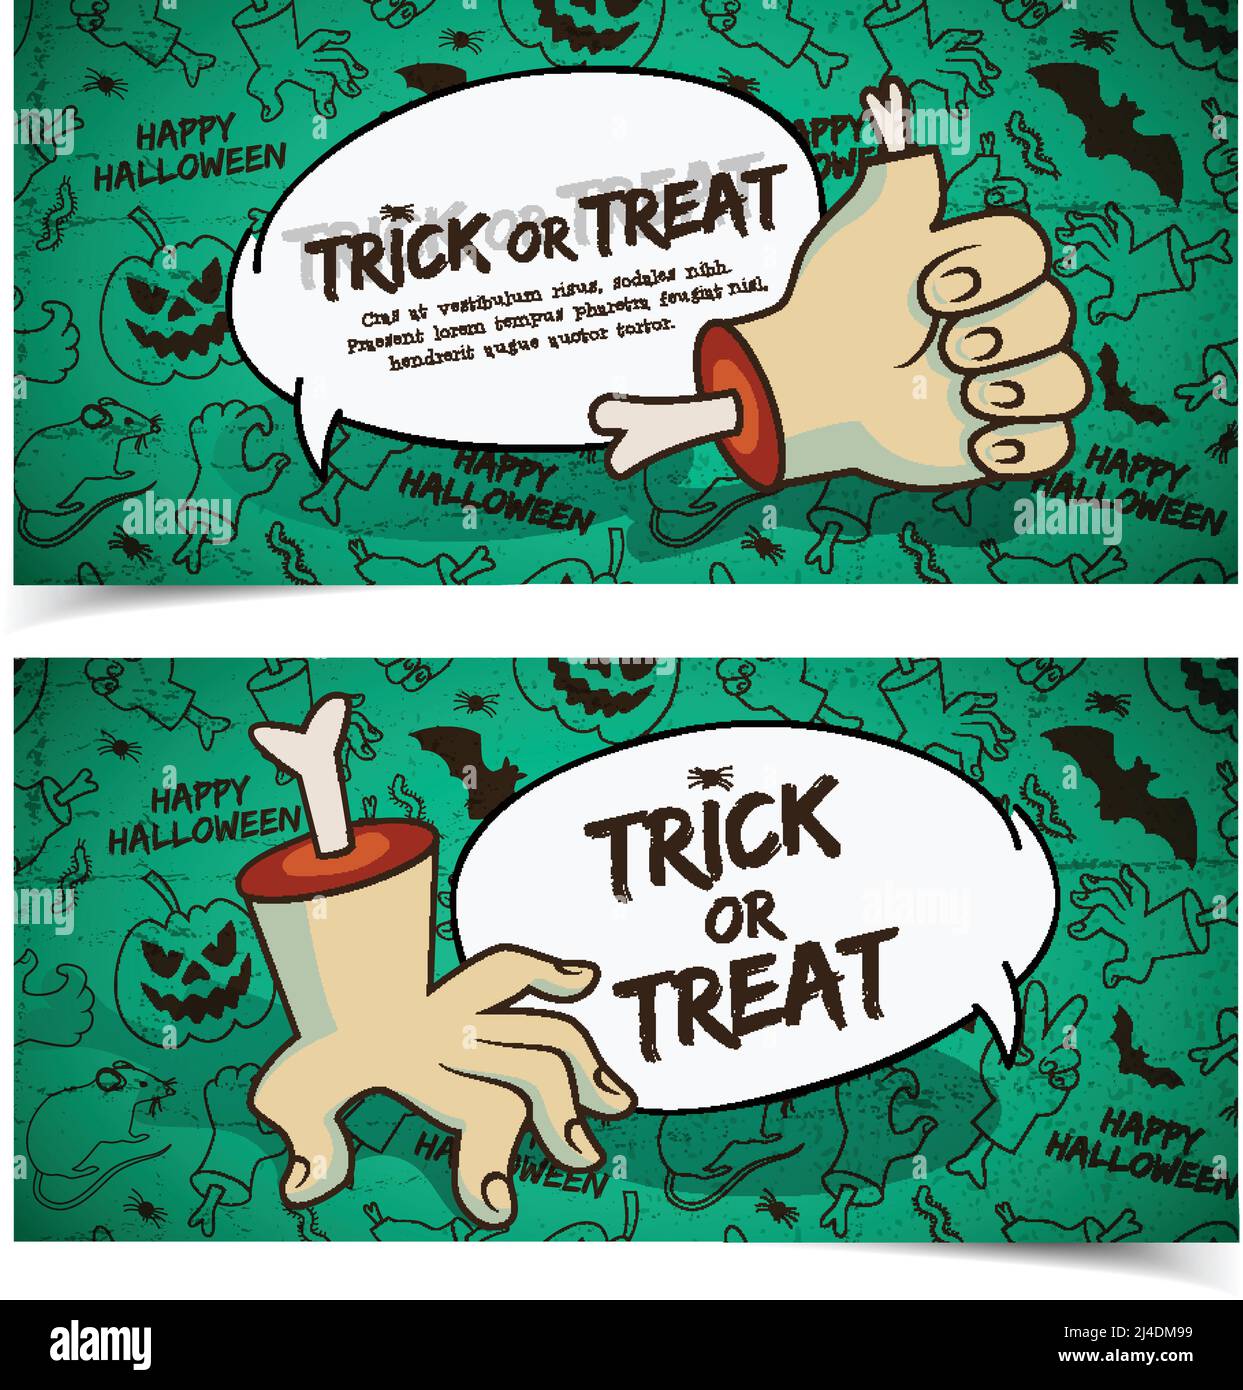 Creepy Halloween horizontal banners with speech cloud zombie arm gestures and icons green background vector illustration Stock Vector